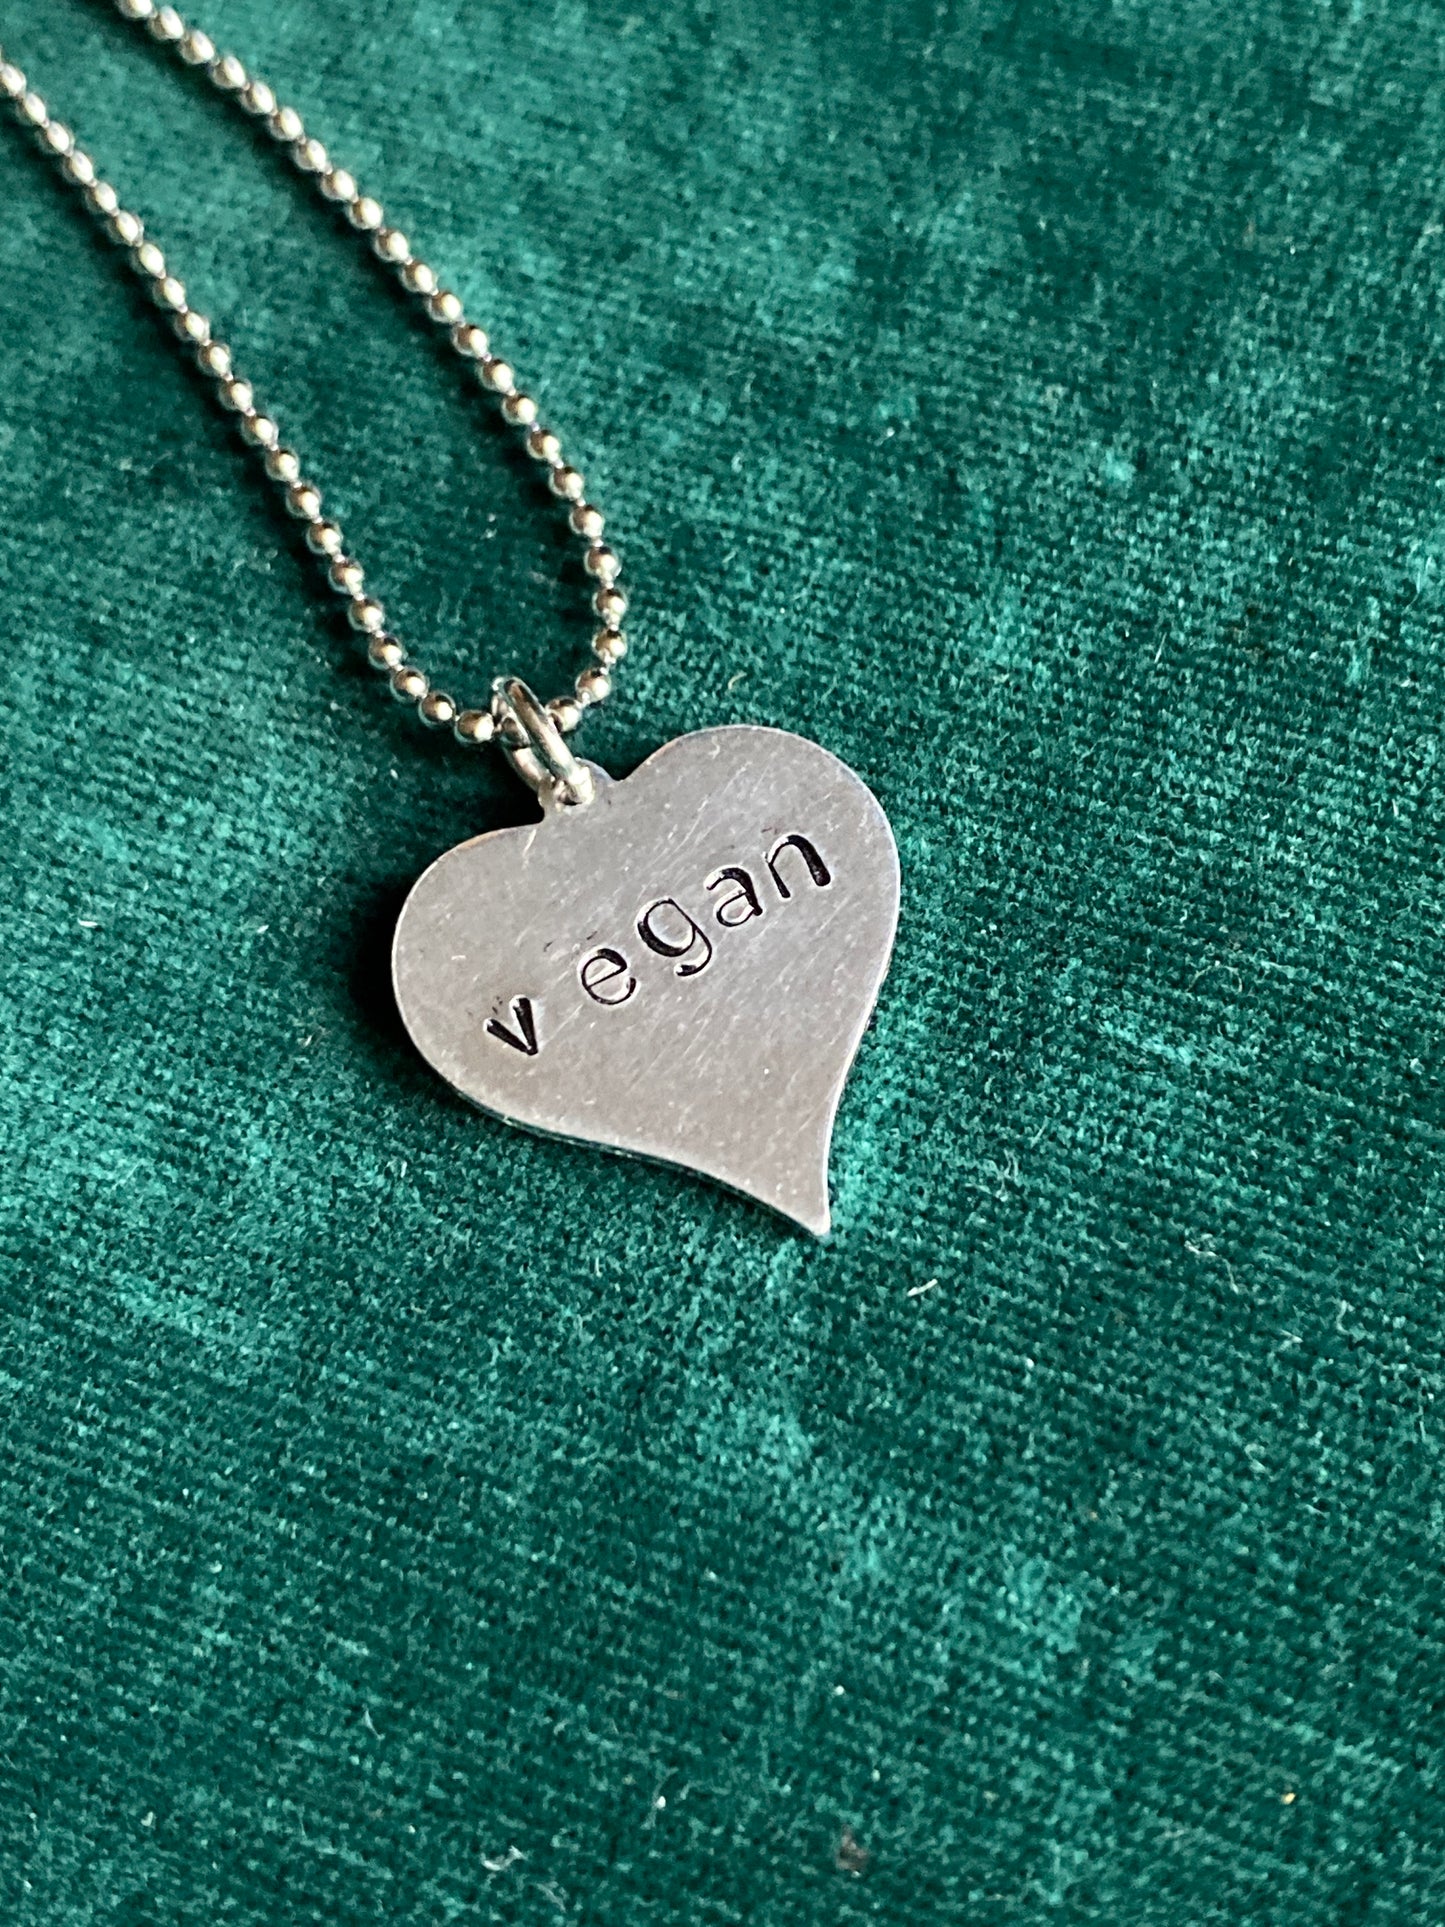 This is a proximately 1 inch heart-shaped aluminum pendant hung on a ball drain chain, and it says vegan in lowercase letters stamped onto the pendant